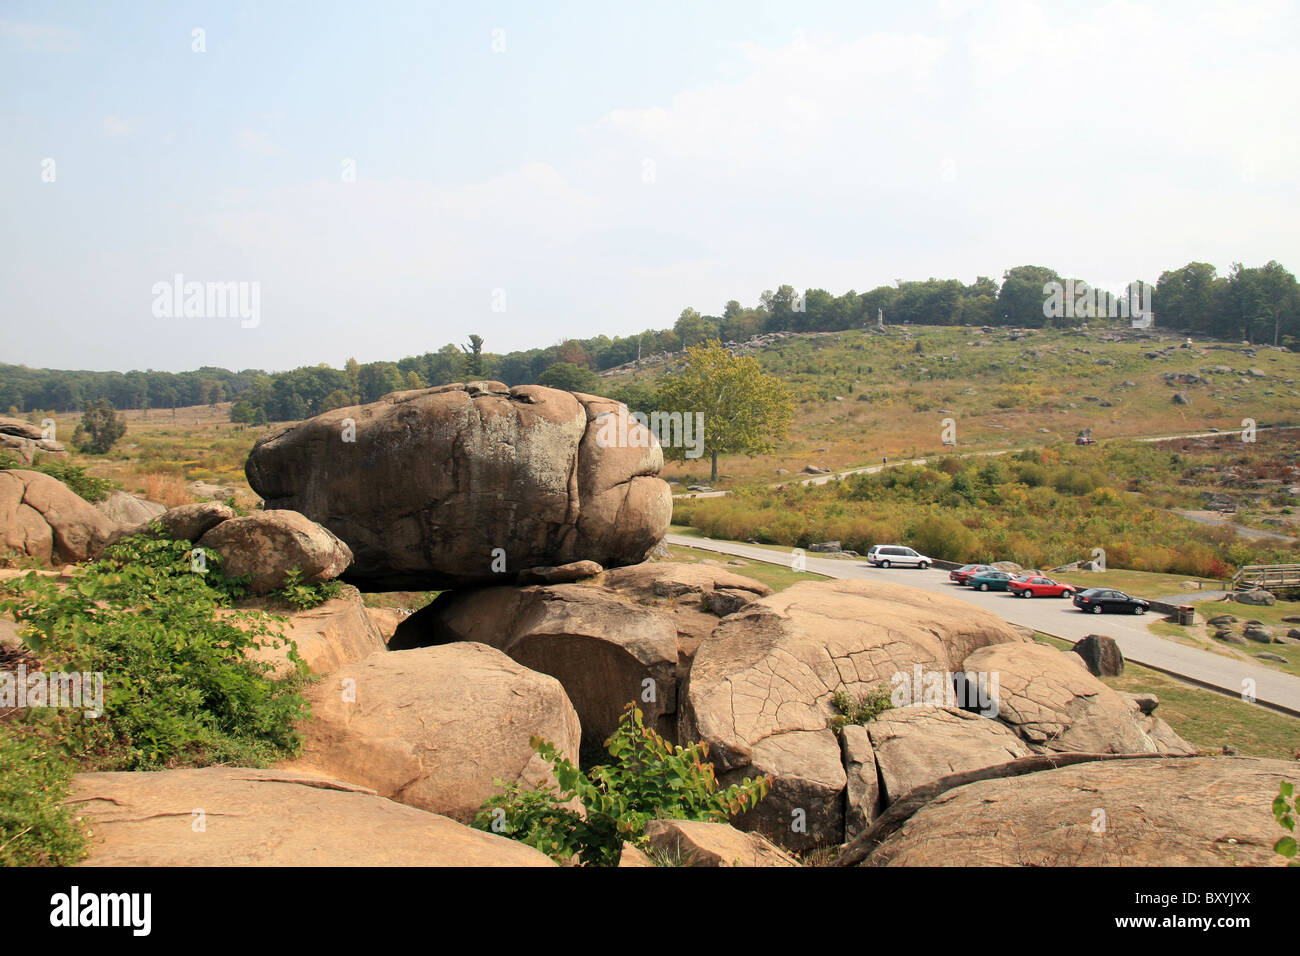 Trail Leading To Devils Den In Gettysburg Battlefield National Park With  Rock Boulders During Summer Stock Photo - Download Image Now - iStock